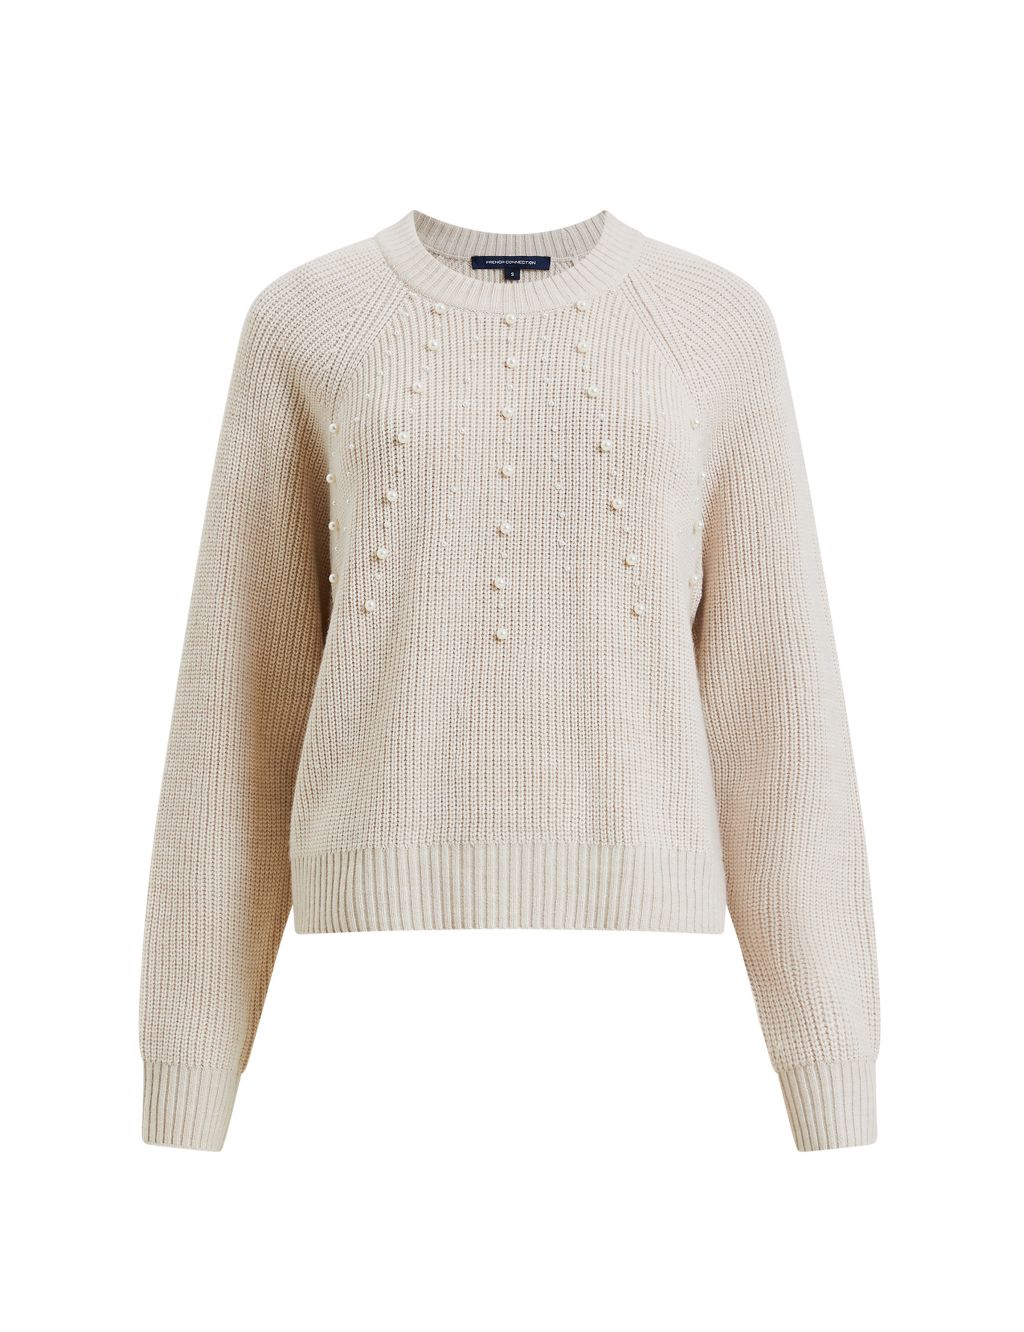 Embellished Ribbed Crew Neck Jumper | French Connection | M&S